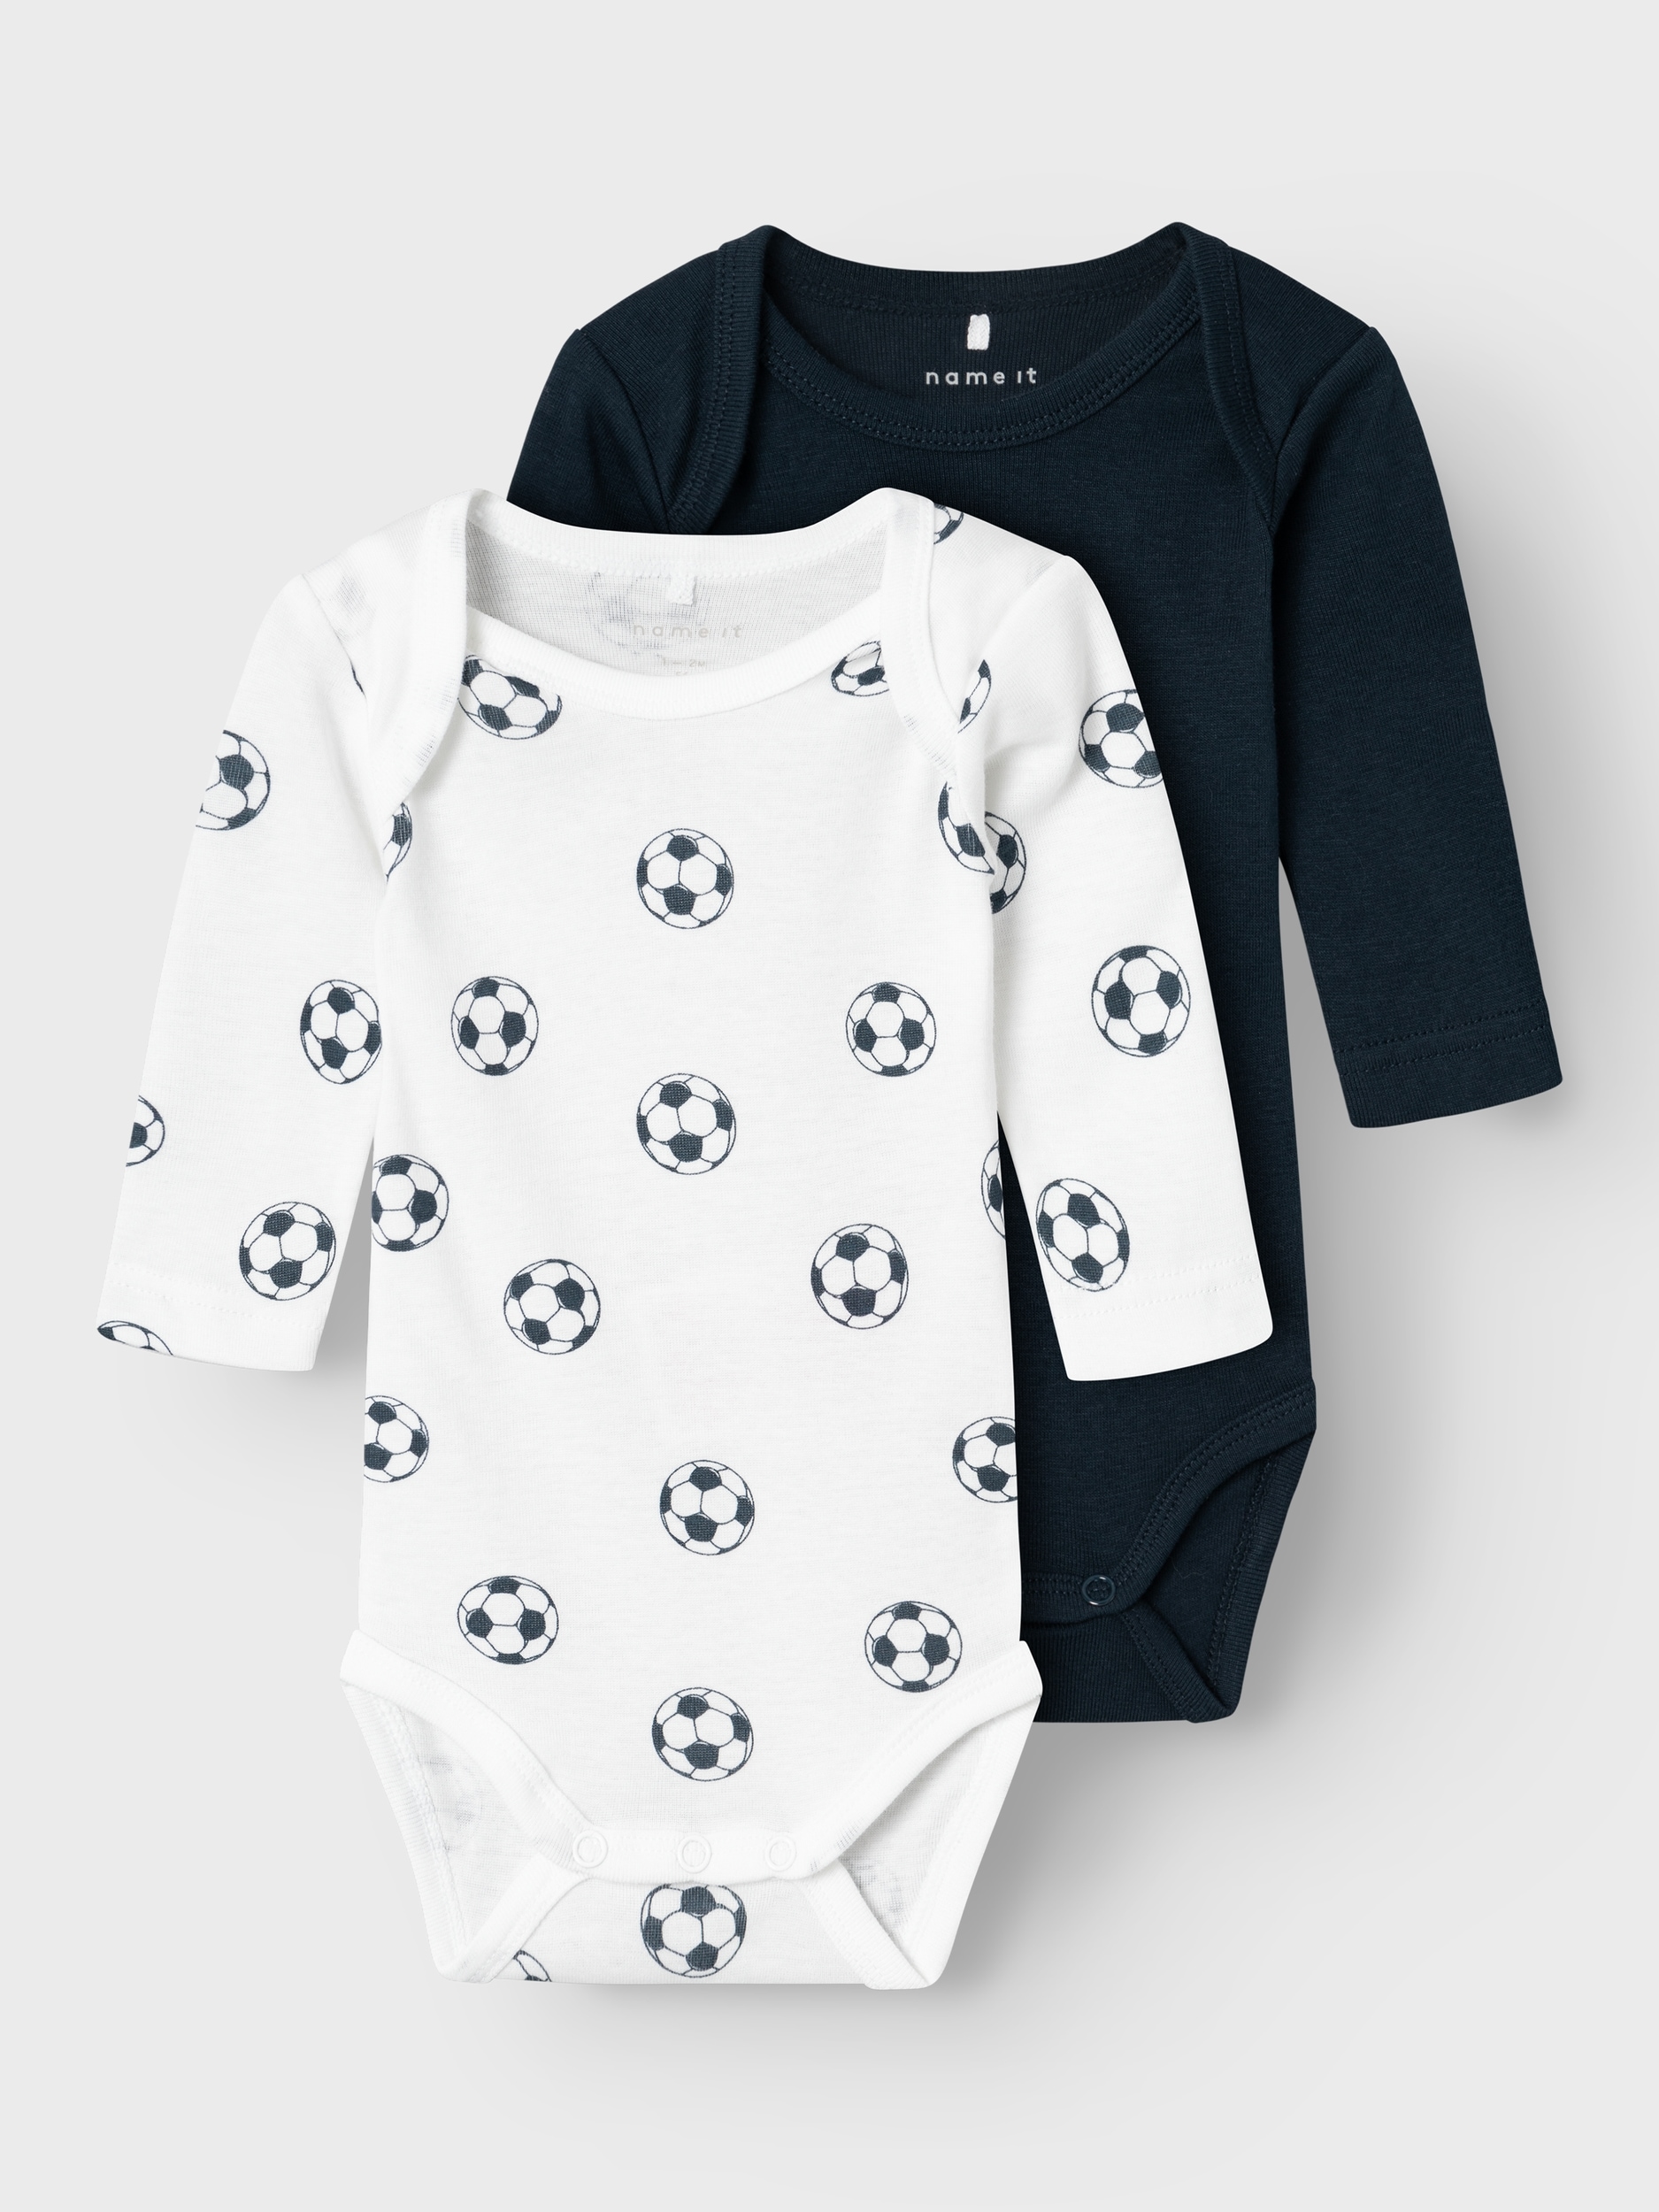 It tlg.) Name 2 »NBMBODY online 2P Schlafoverall NOOS«, bestellen FOOTBALL (Packung, LS